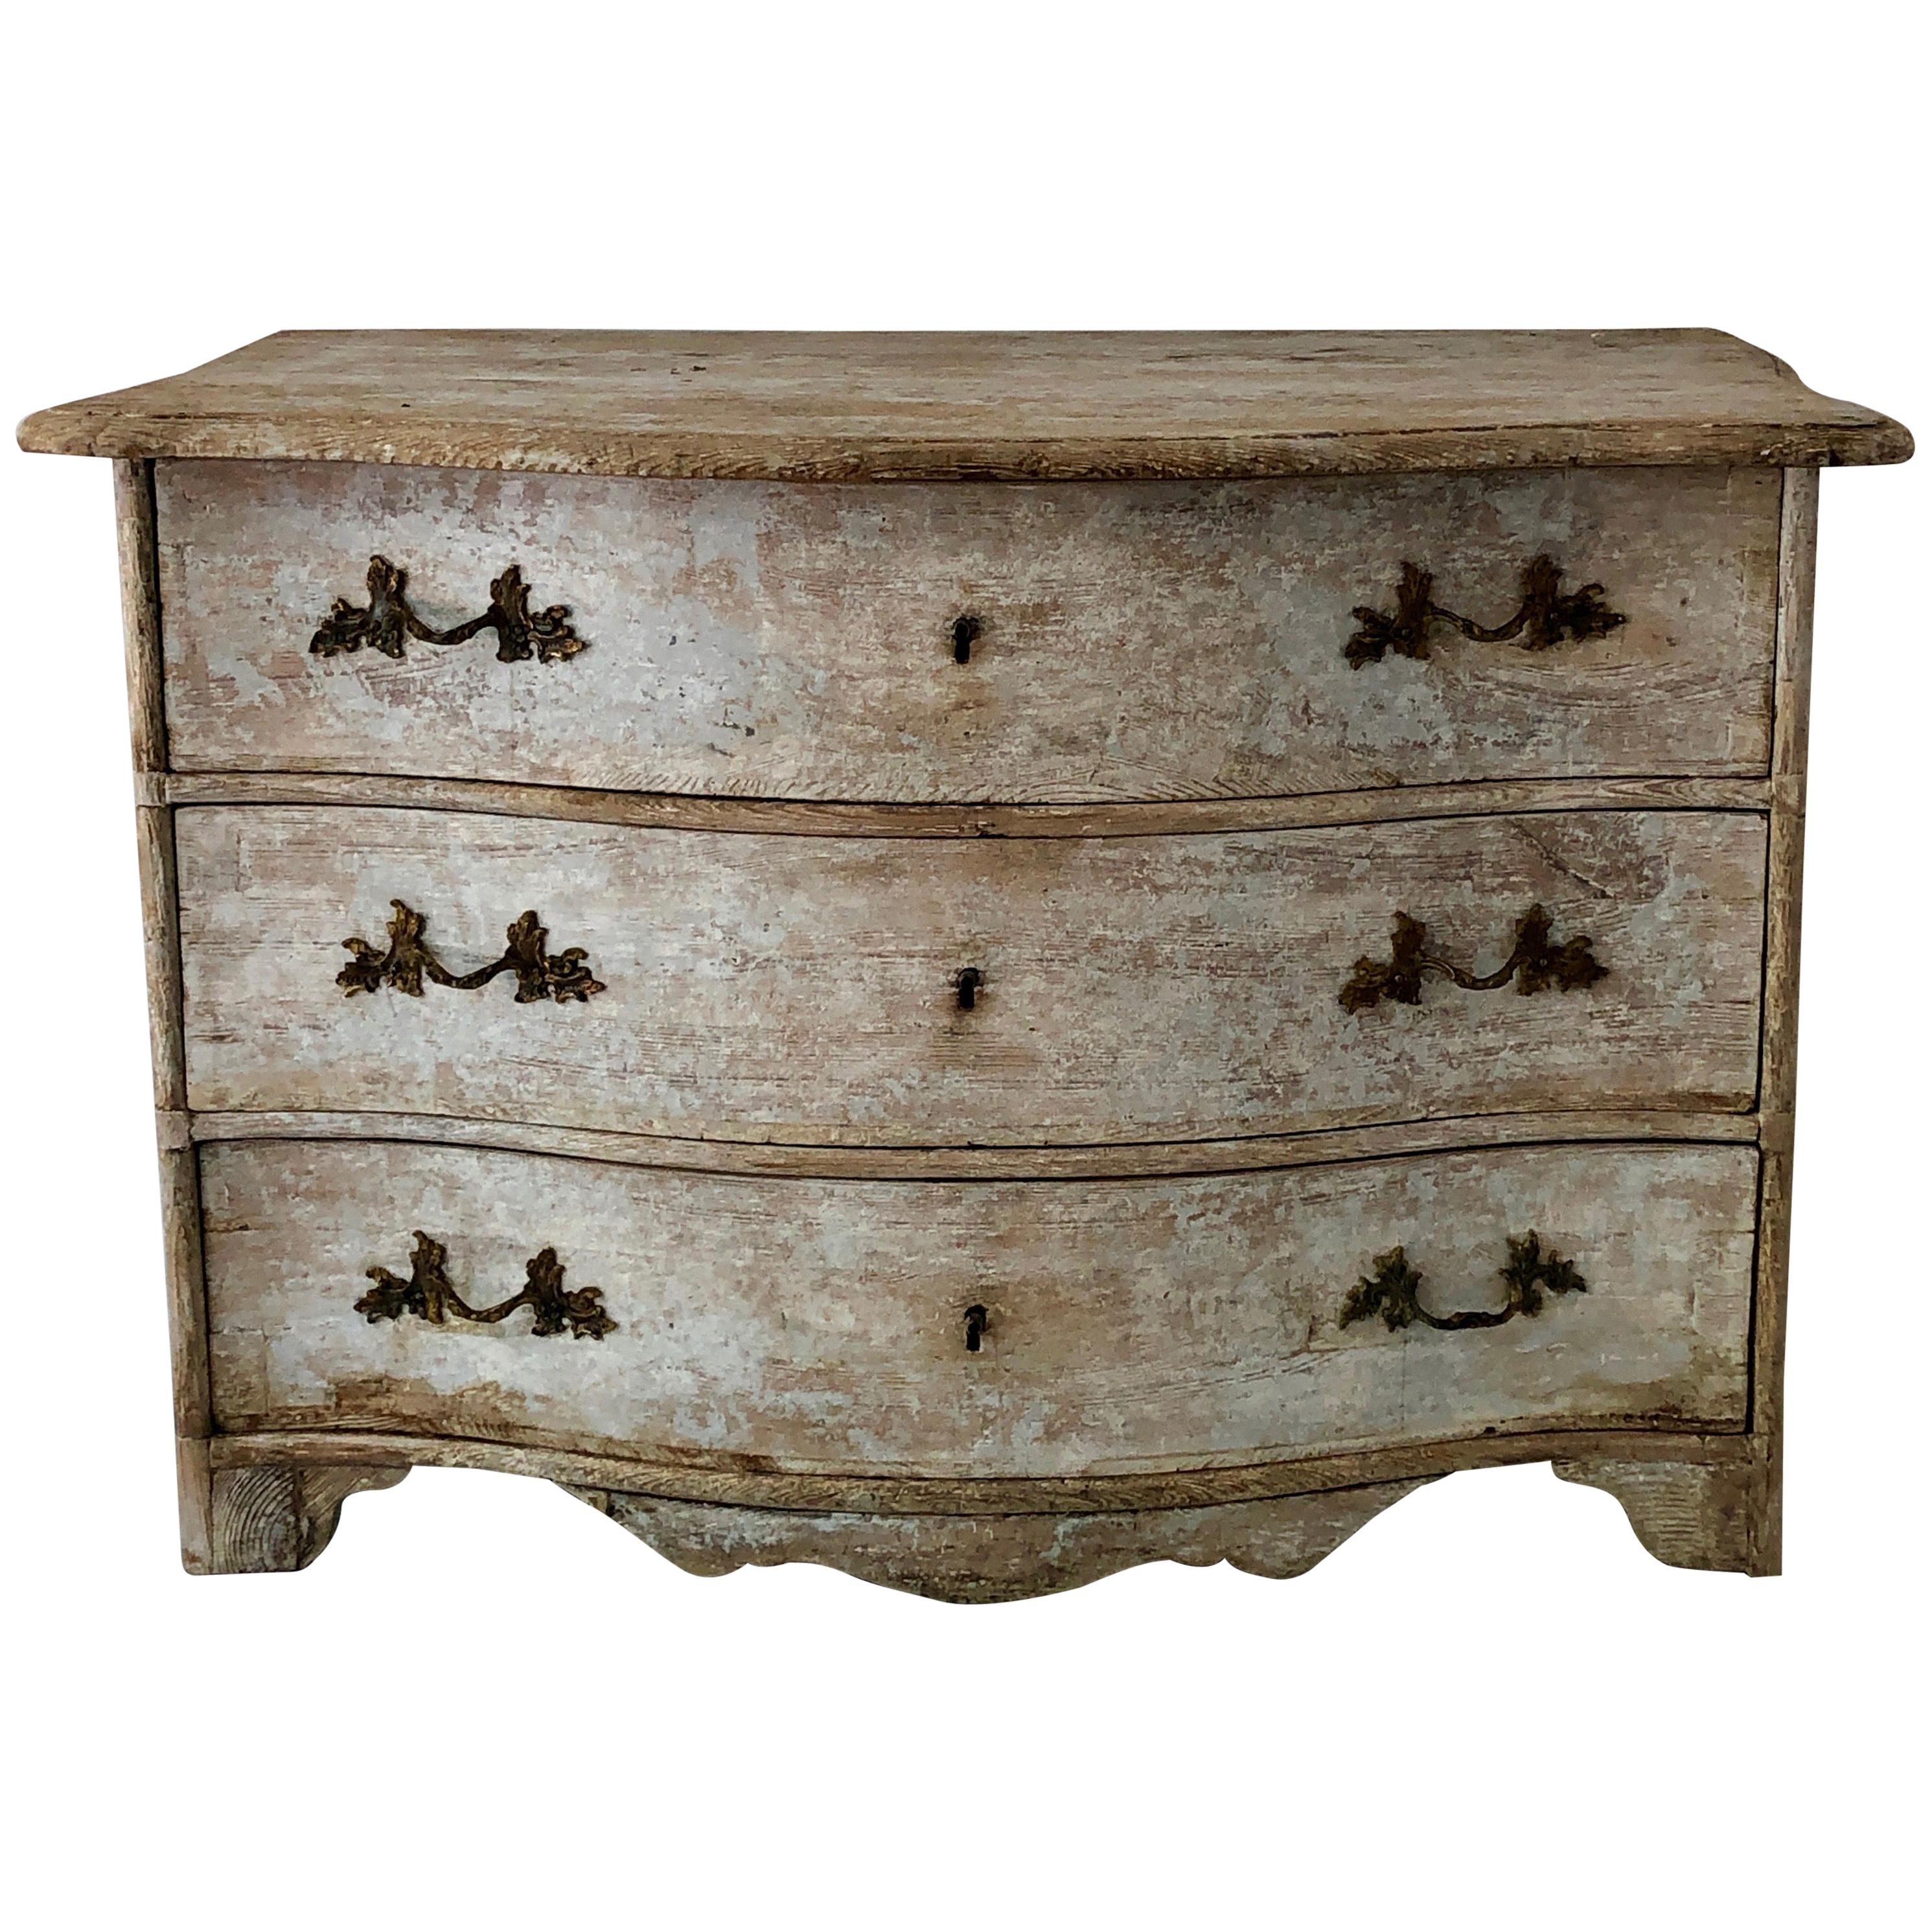 18th Century Chest of Drawers from Late Baroque Period in Richly Carved Curvaceo